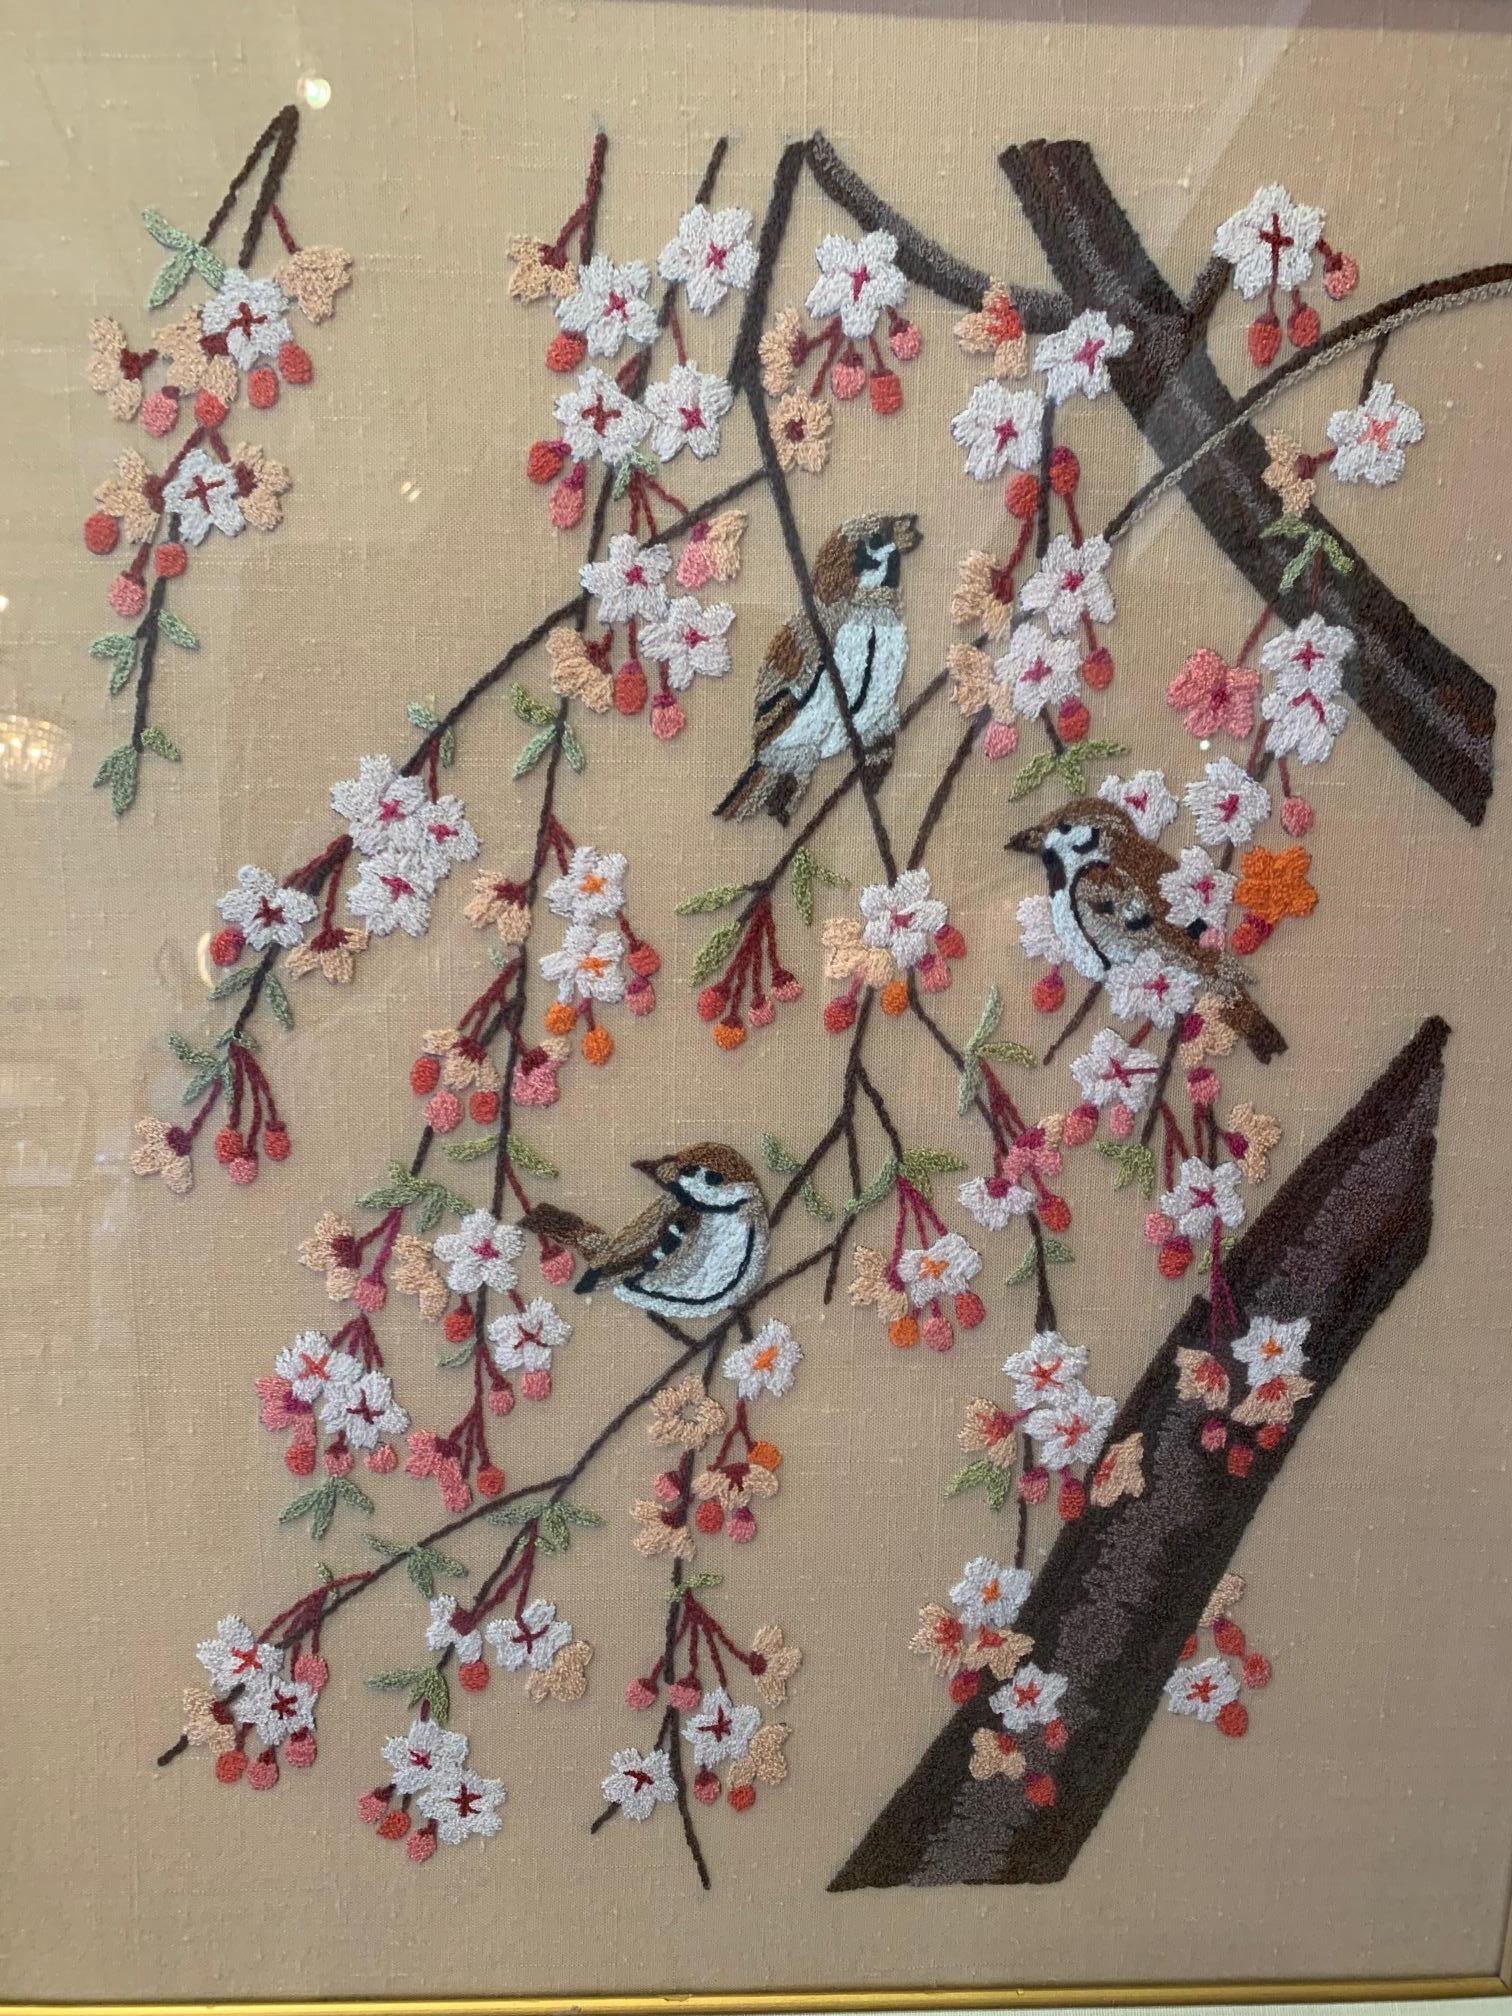 Pretty crewel work piece of art depicting lovely composition of two birds and cherry blossoms elegantly matted and framed.